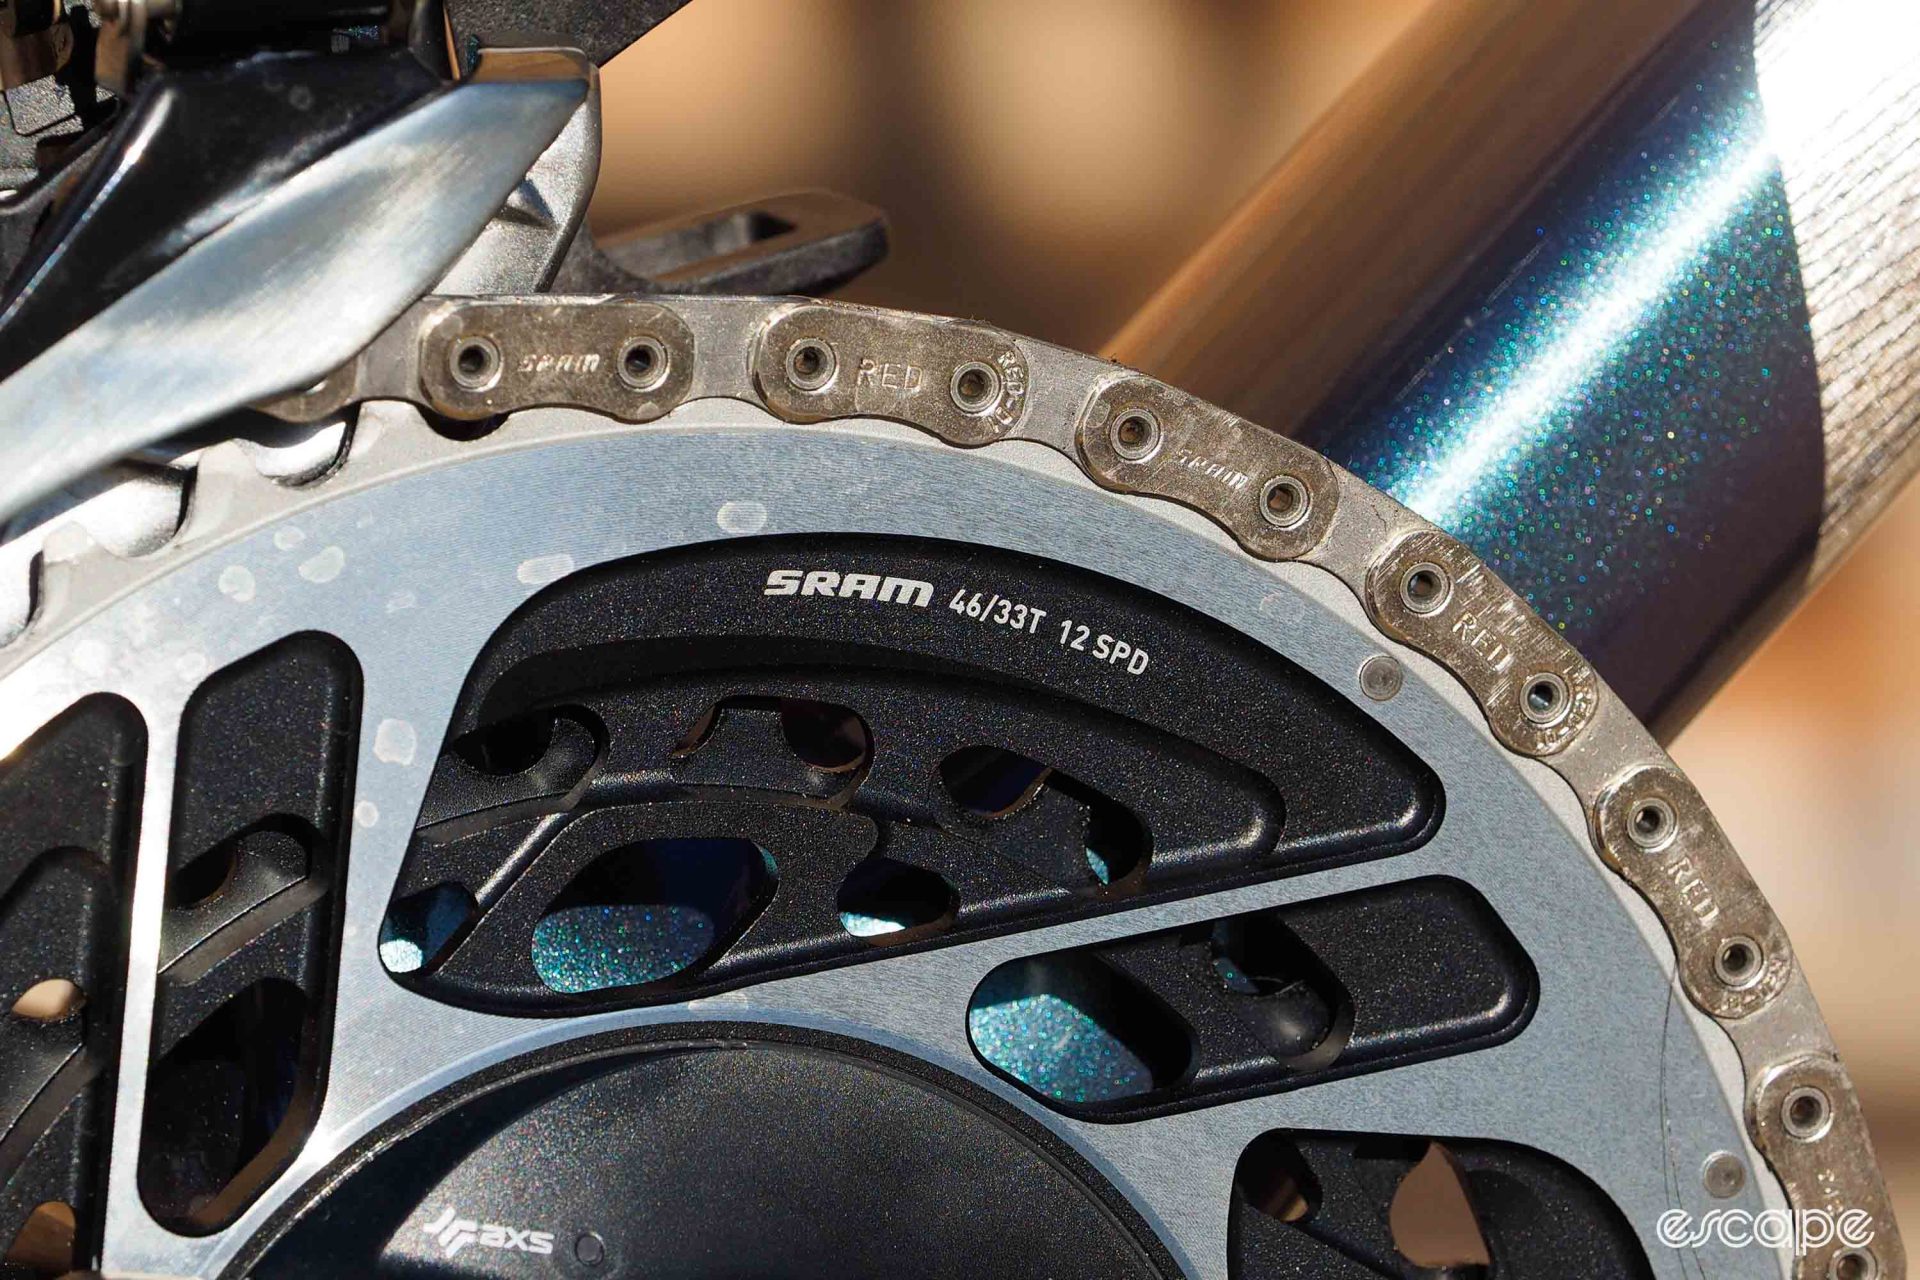 A closeup of the chainrings, showing the 33/46T gearing and Red Flattop chain.